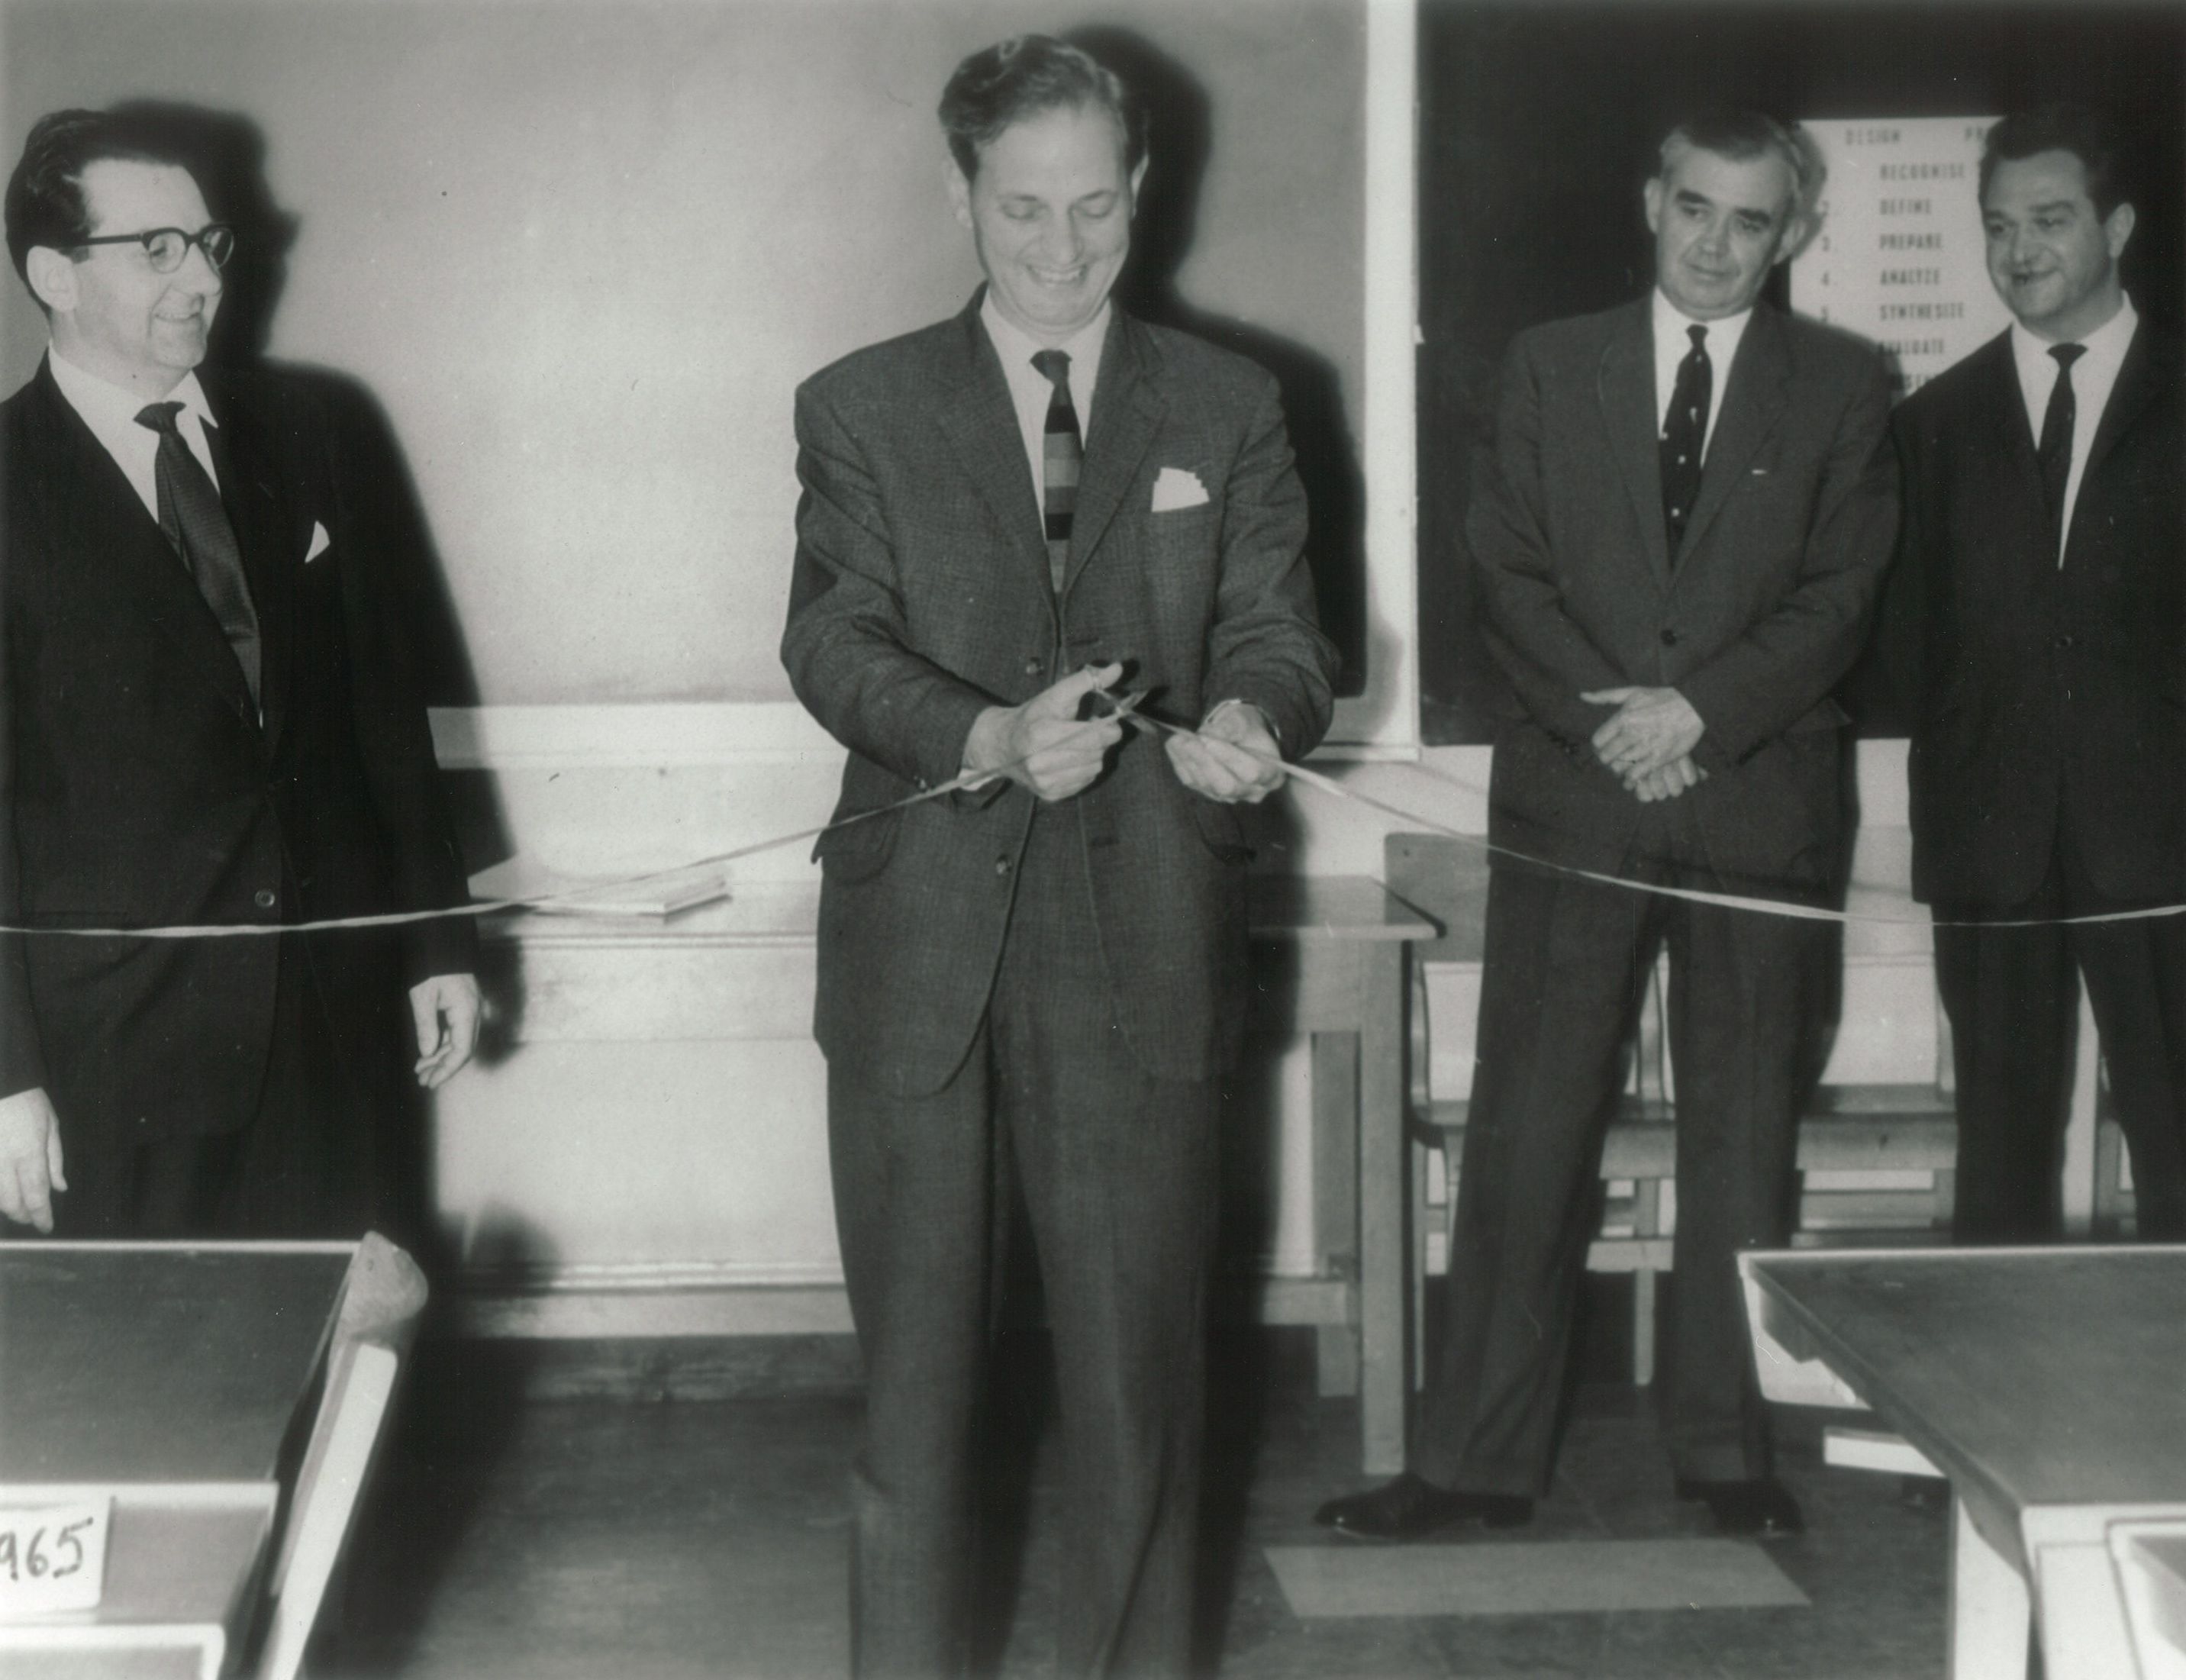 Black and white photographic image showing Professor Joseph Black opening the first annual School of Engineering Design and Project Exhibition, Bristol College of Science & Technology, Ashley Down, Bristol, Summer 1965.